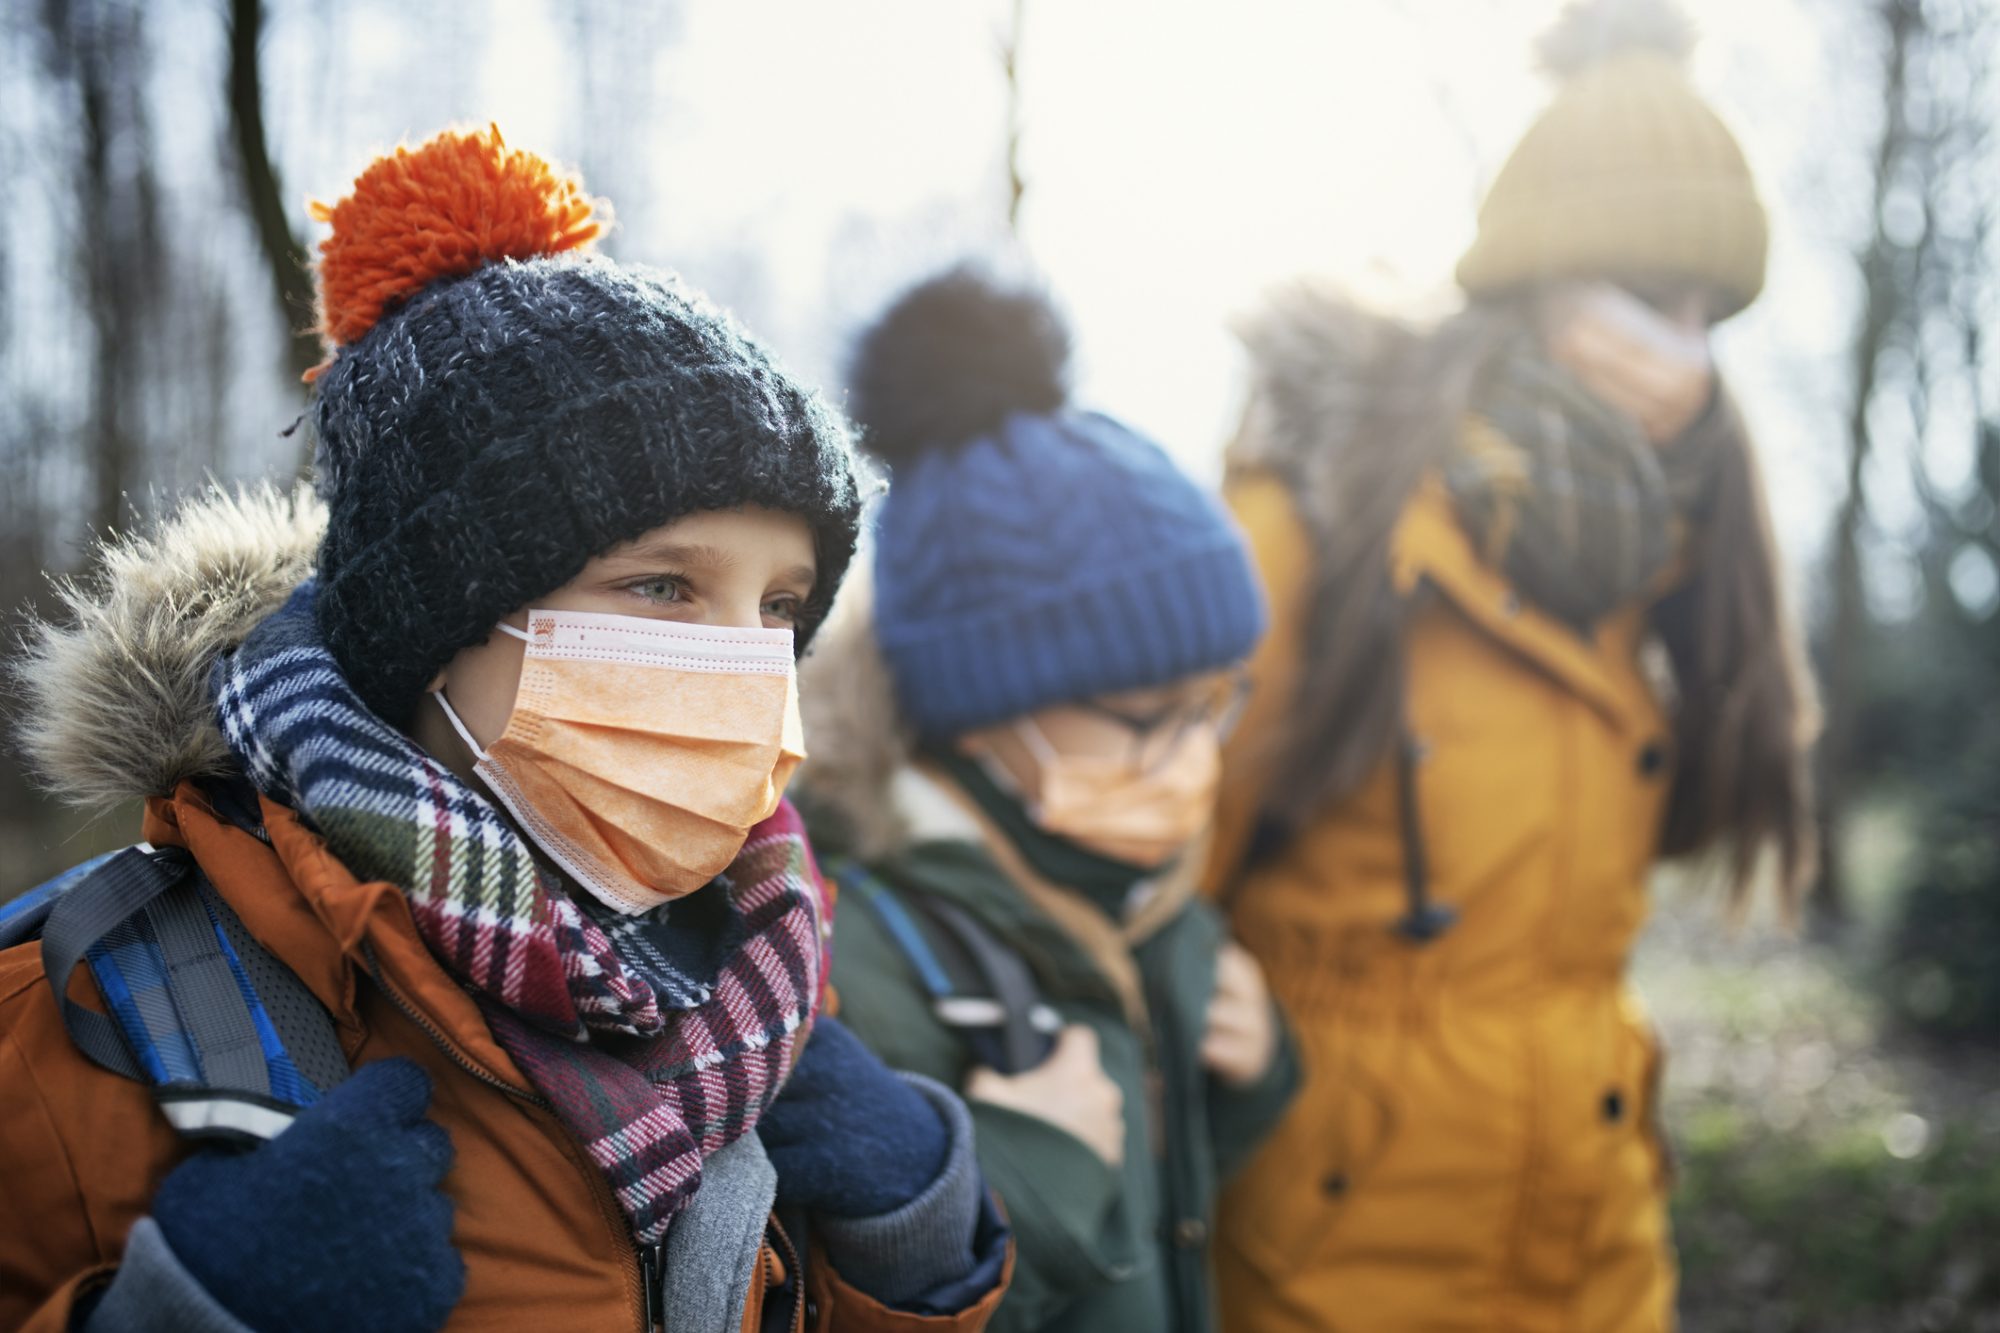 A group of kids wearing masks.